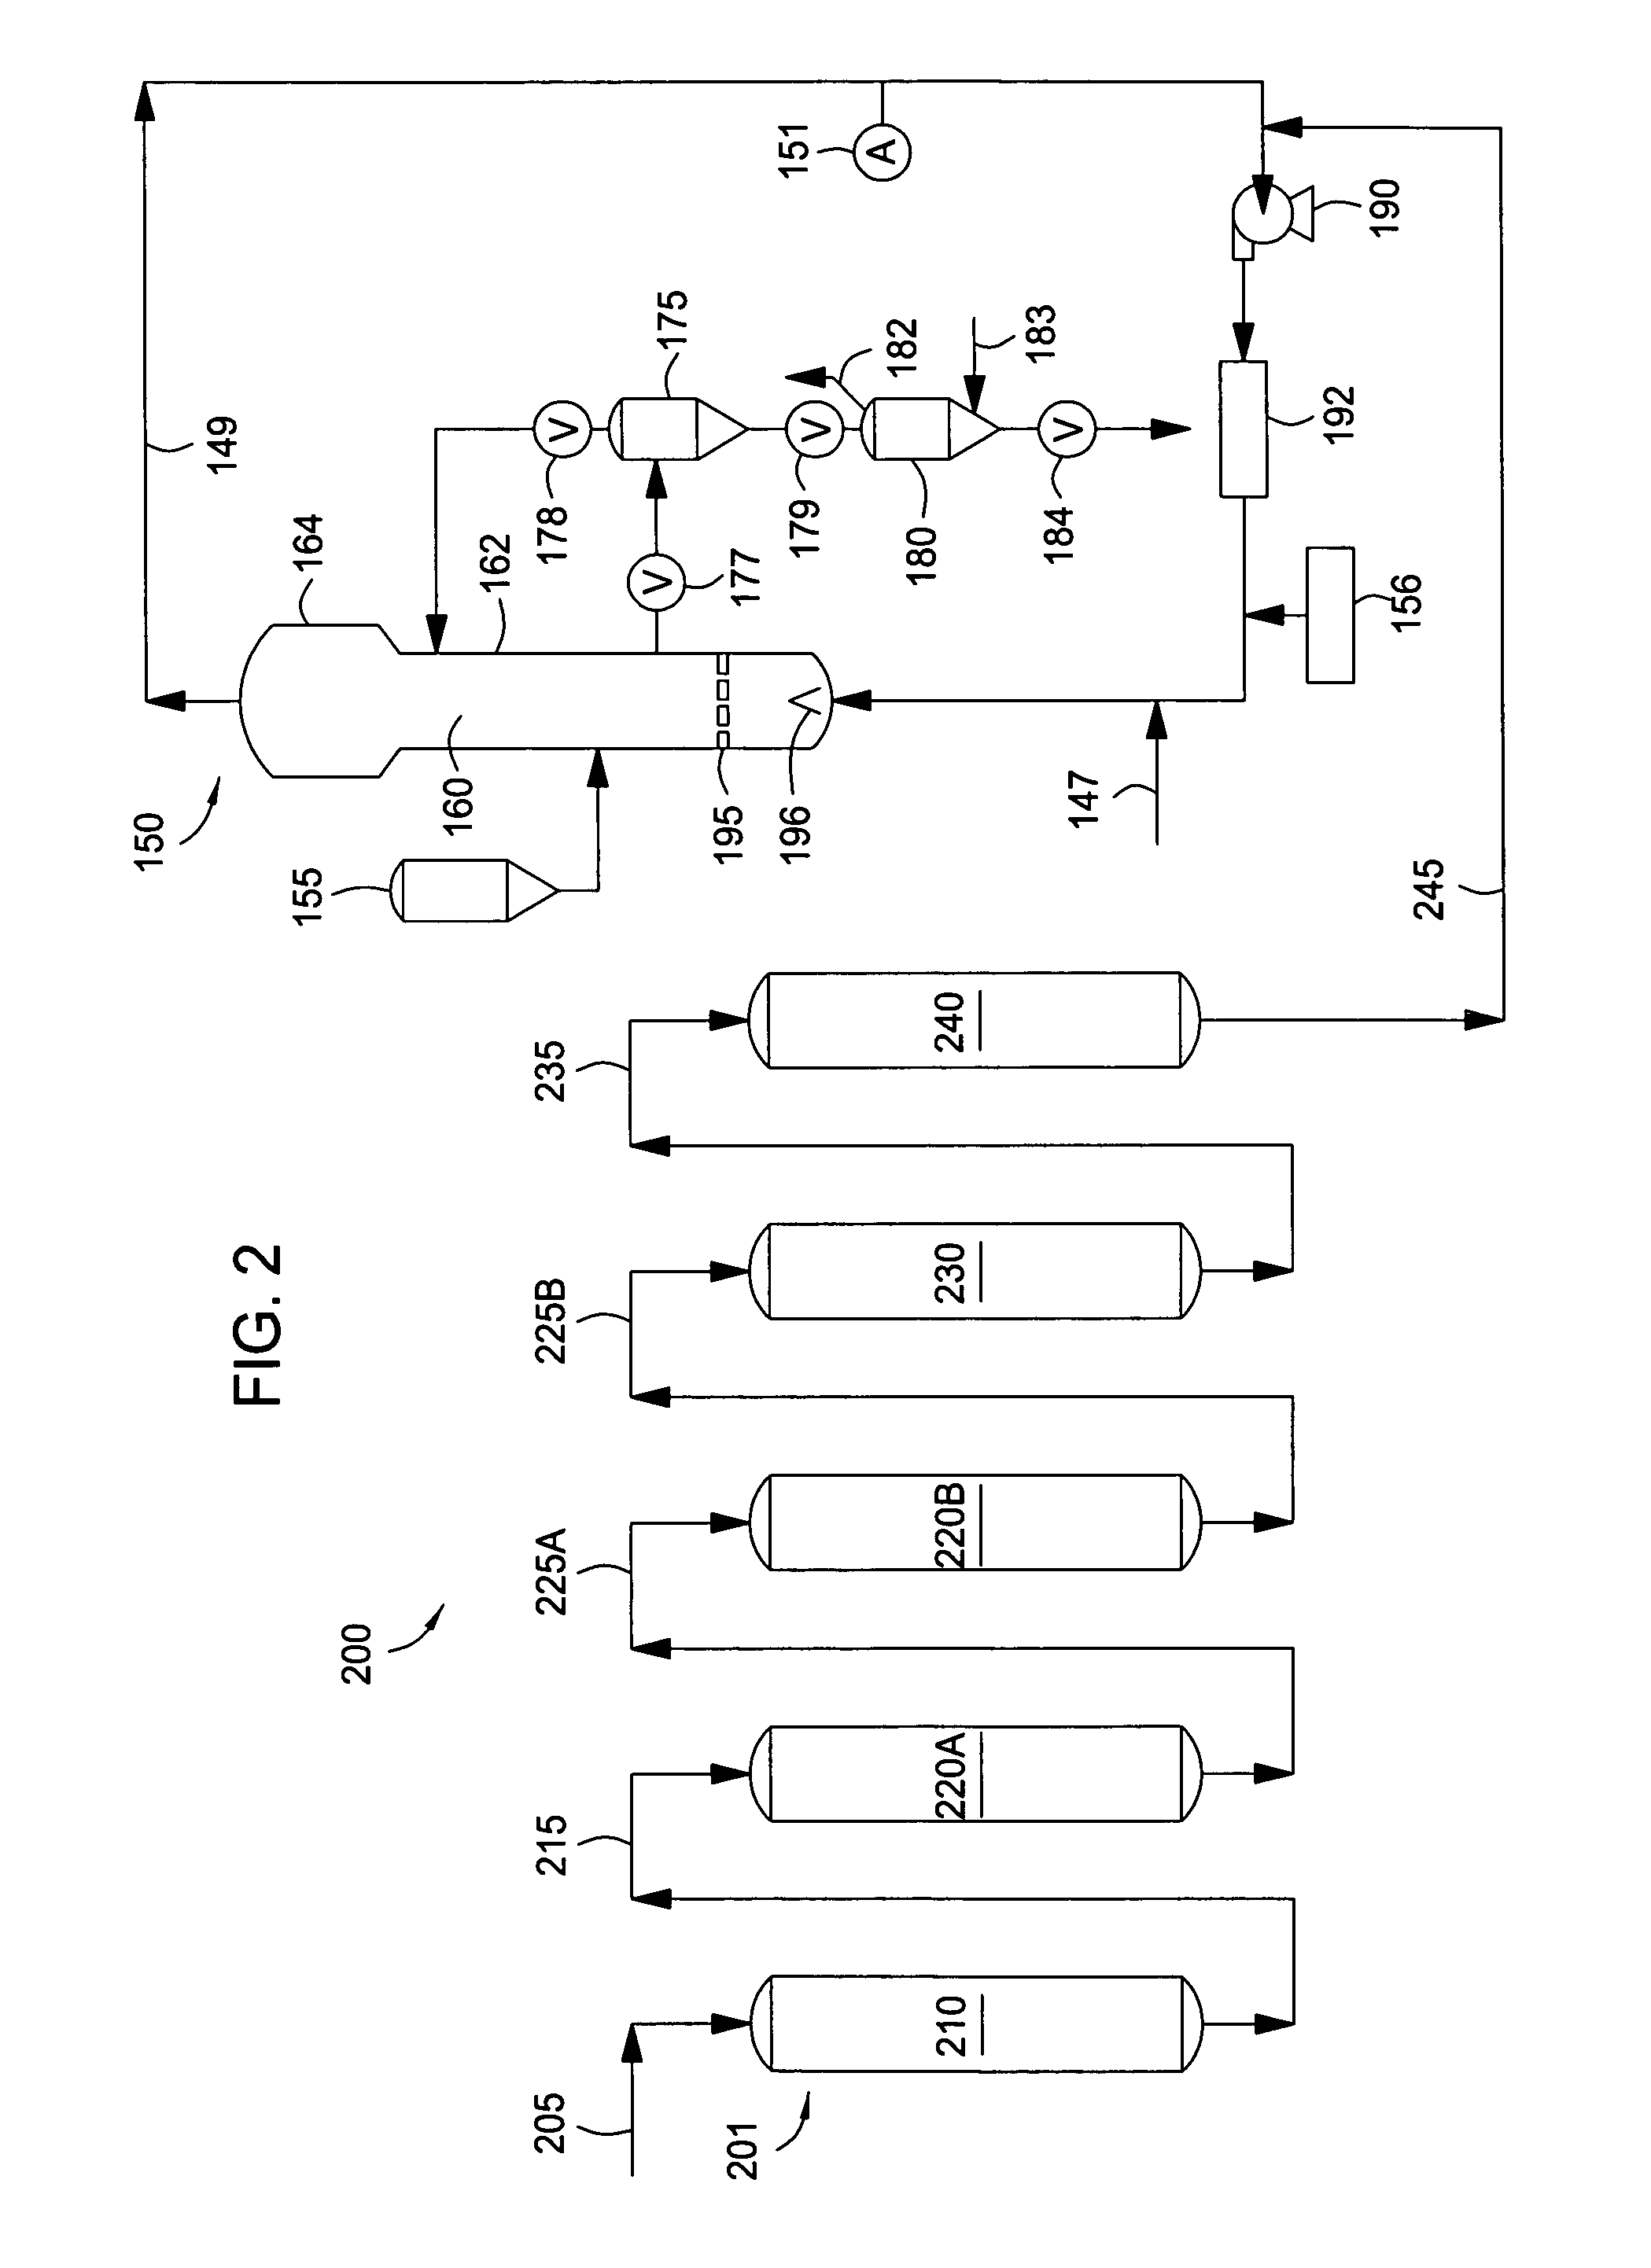 Feed purification at ambient temperature